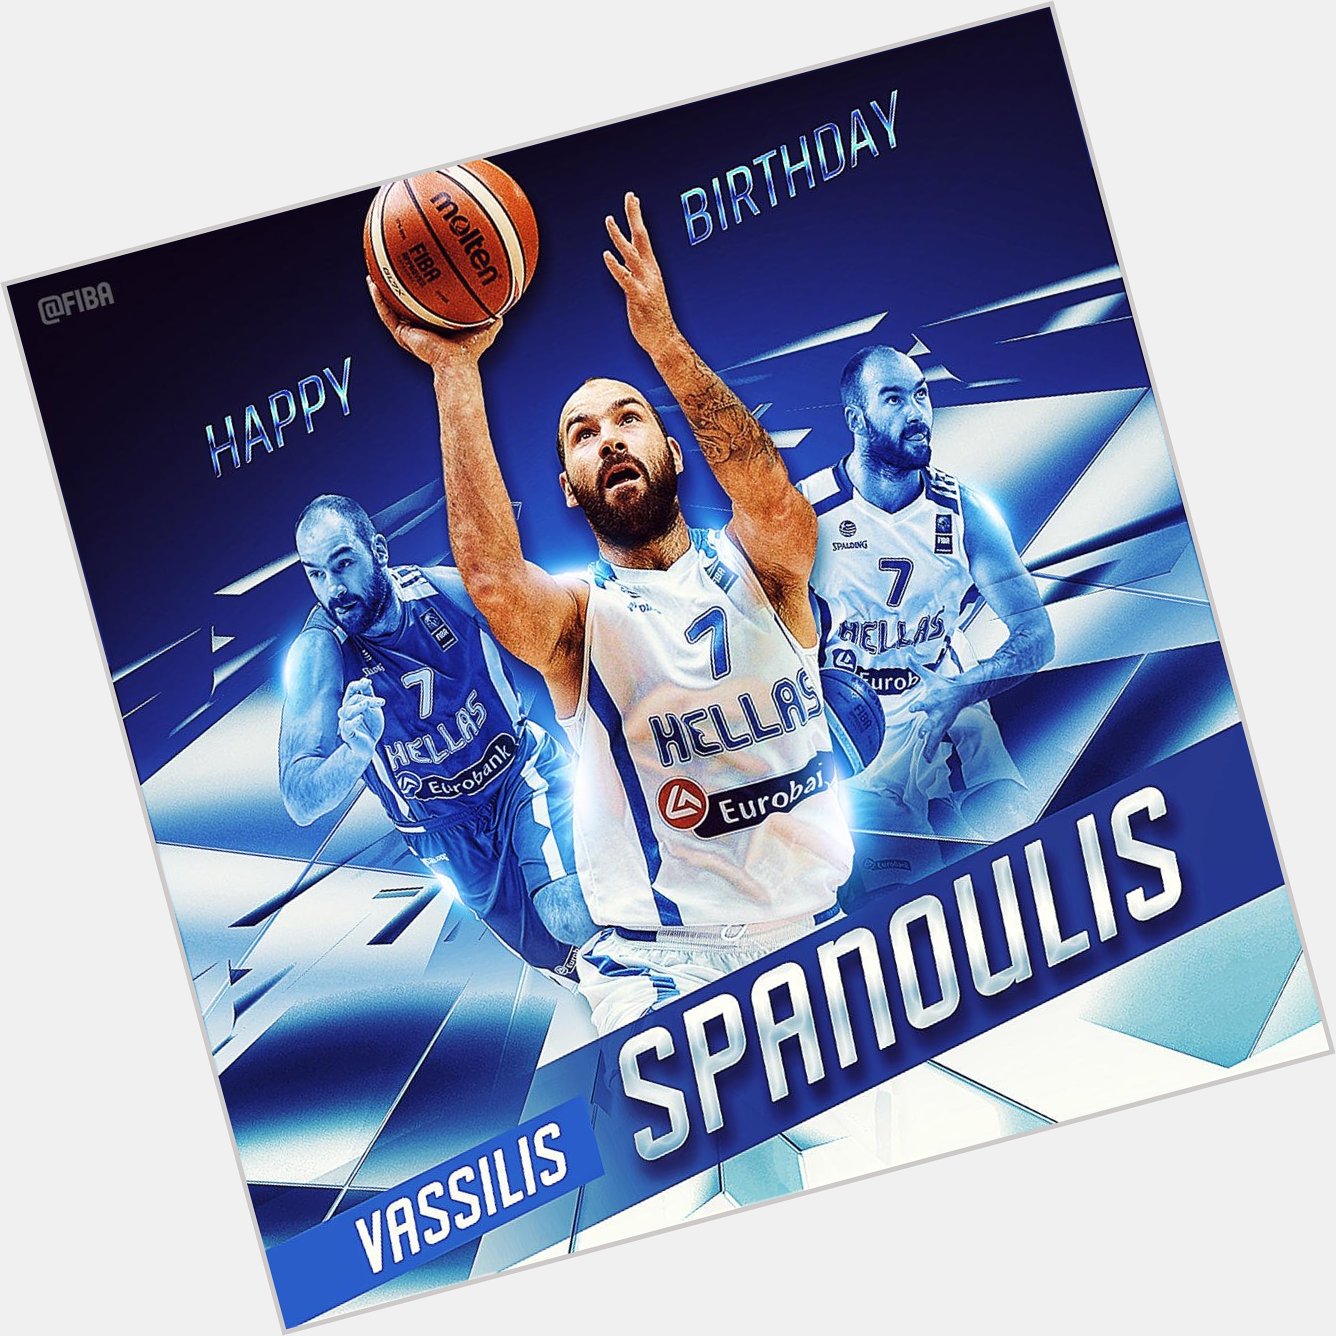   Join us in wishing a Happy 3 5 th Birthday to Vassilis
 Spanoulis  ! 